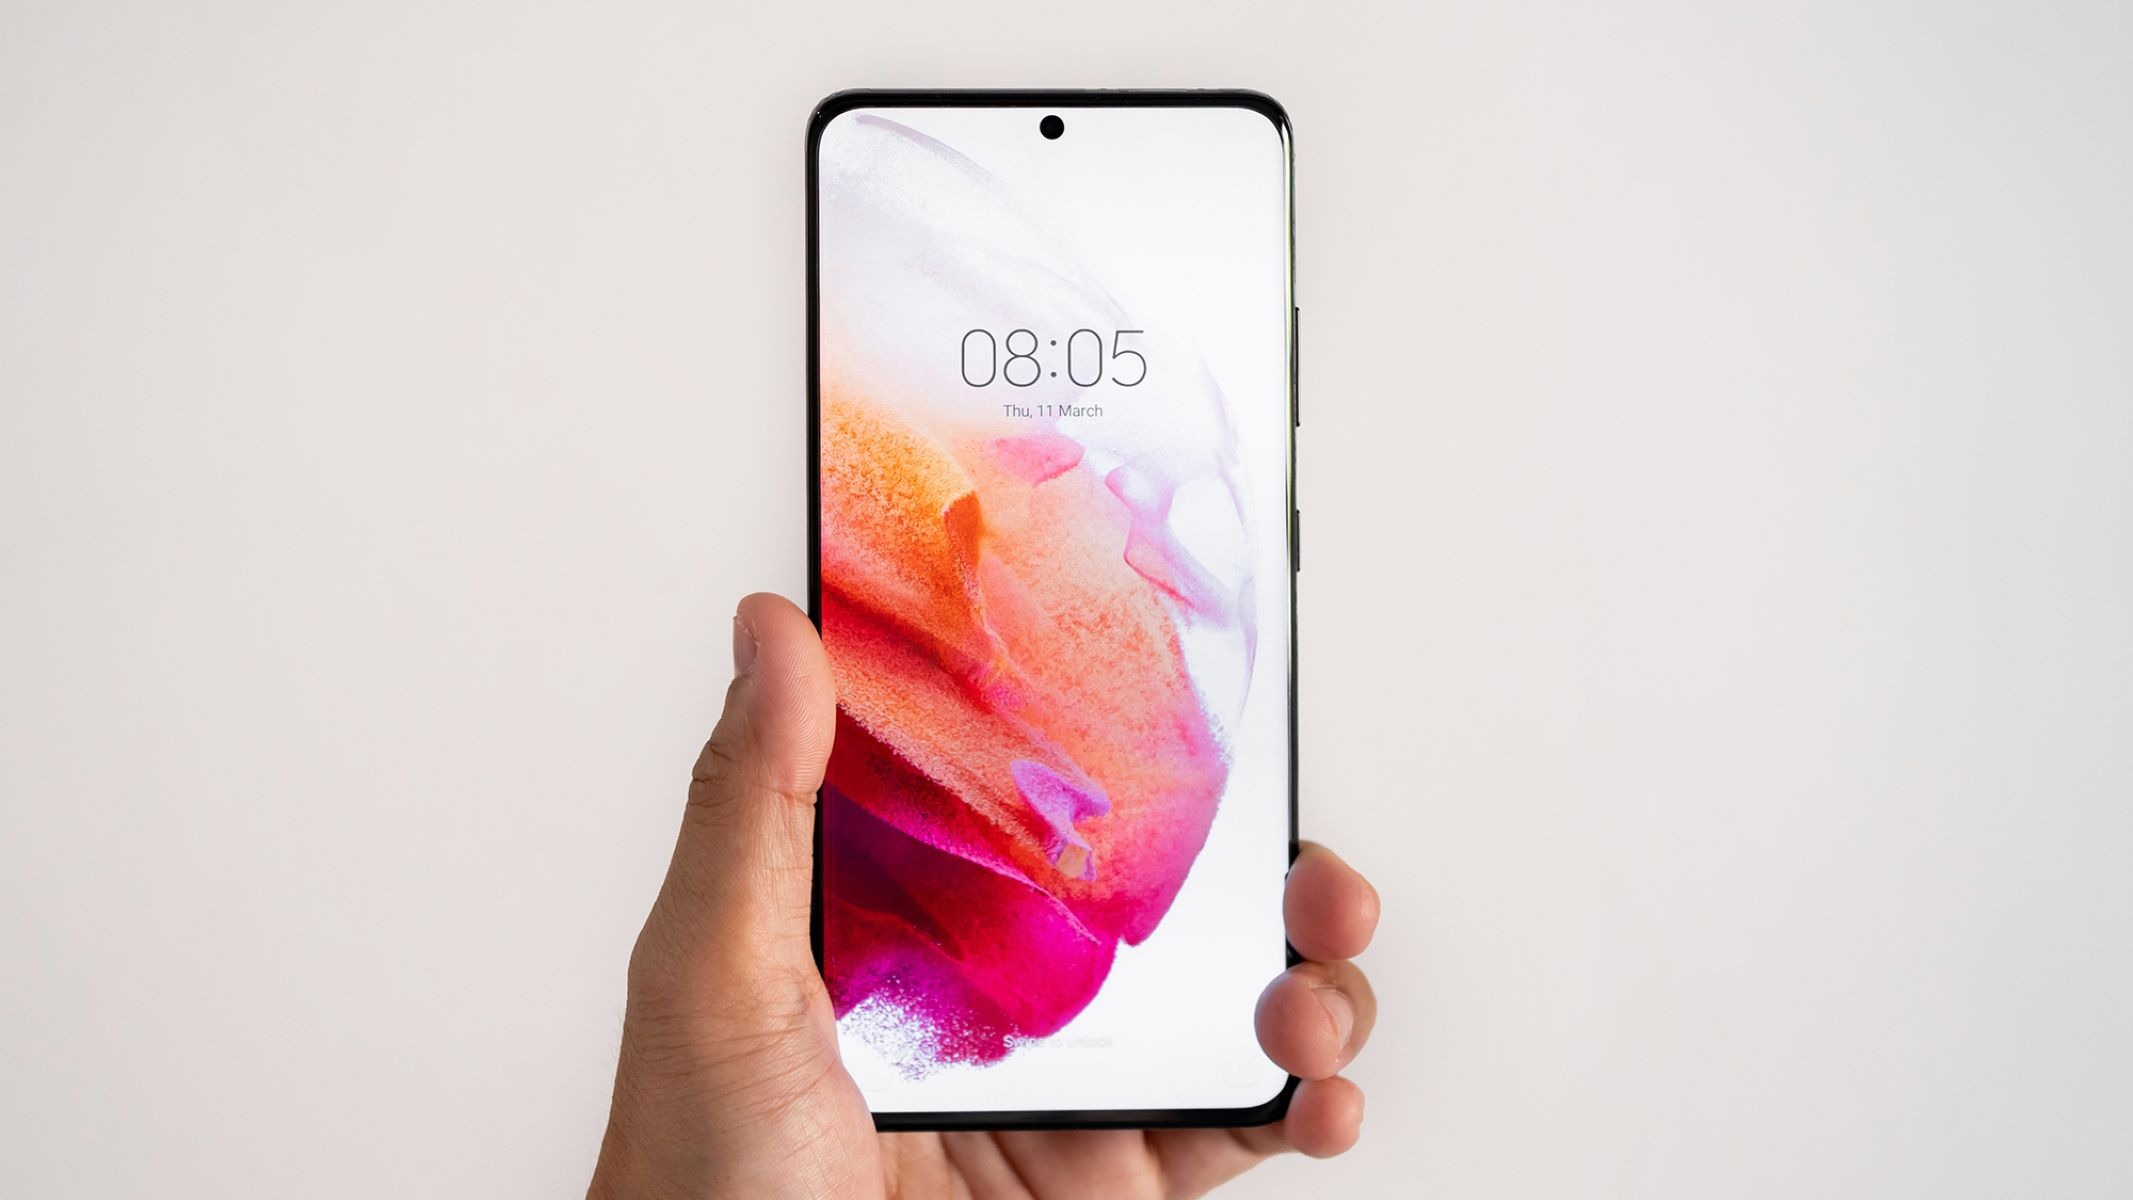 Customize Your Realme Lock Screen Clock: Step-by-Step